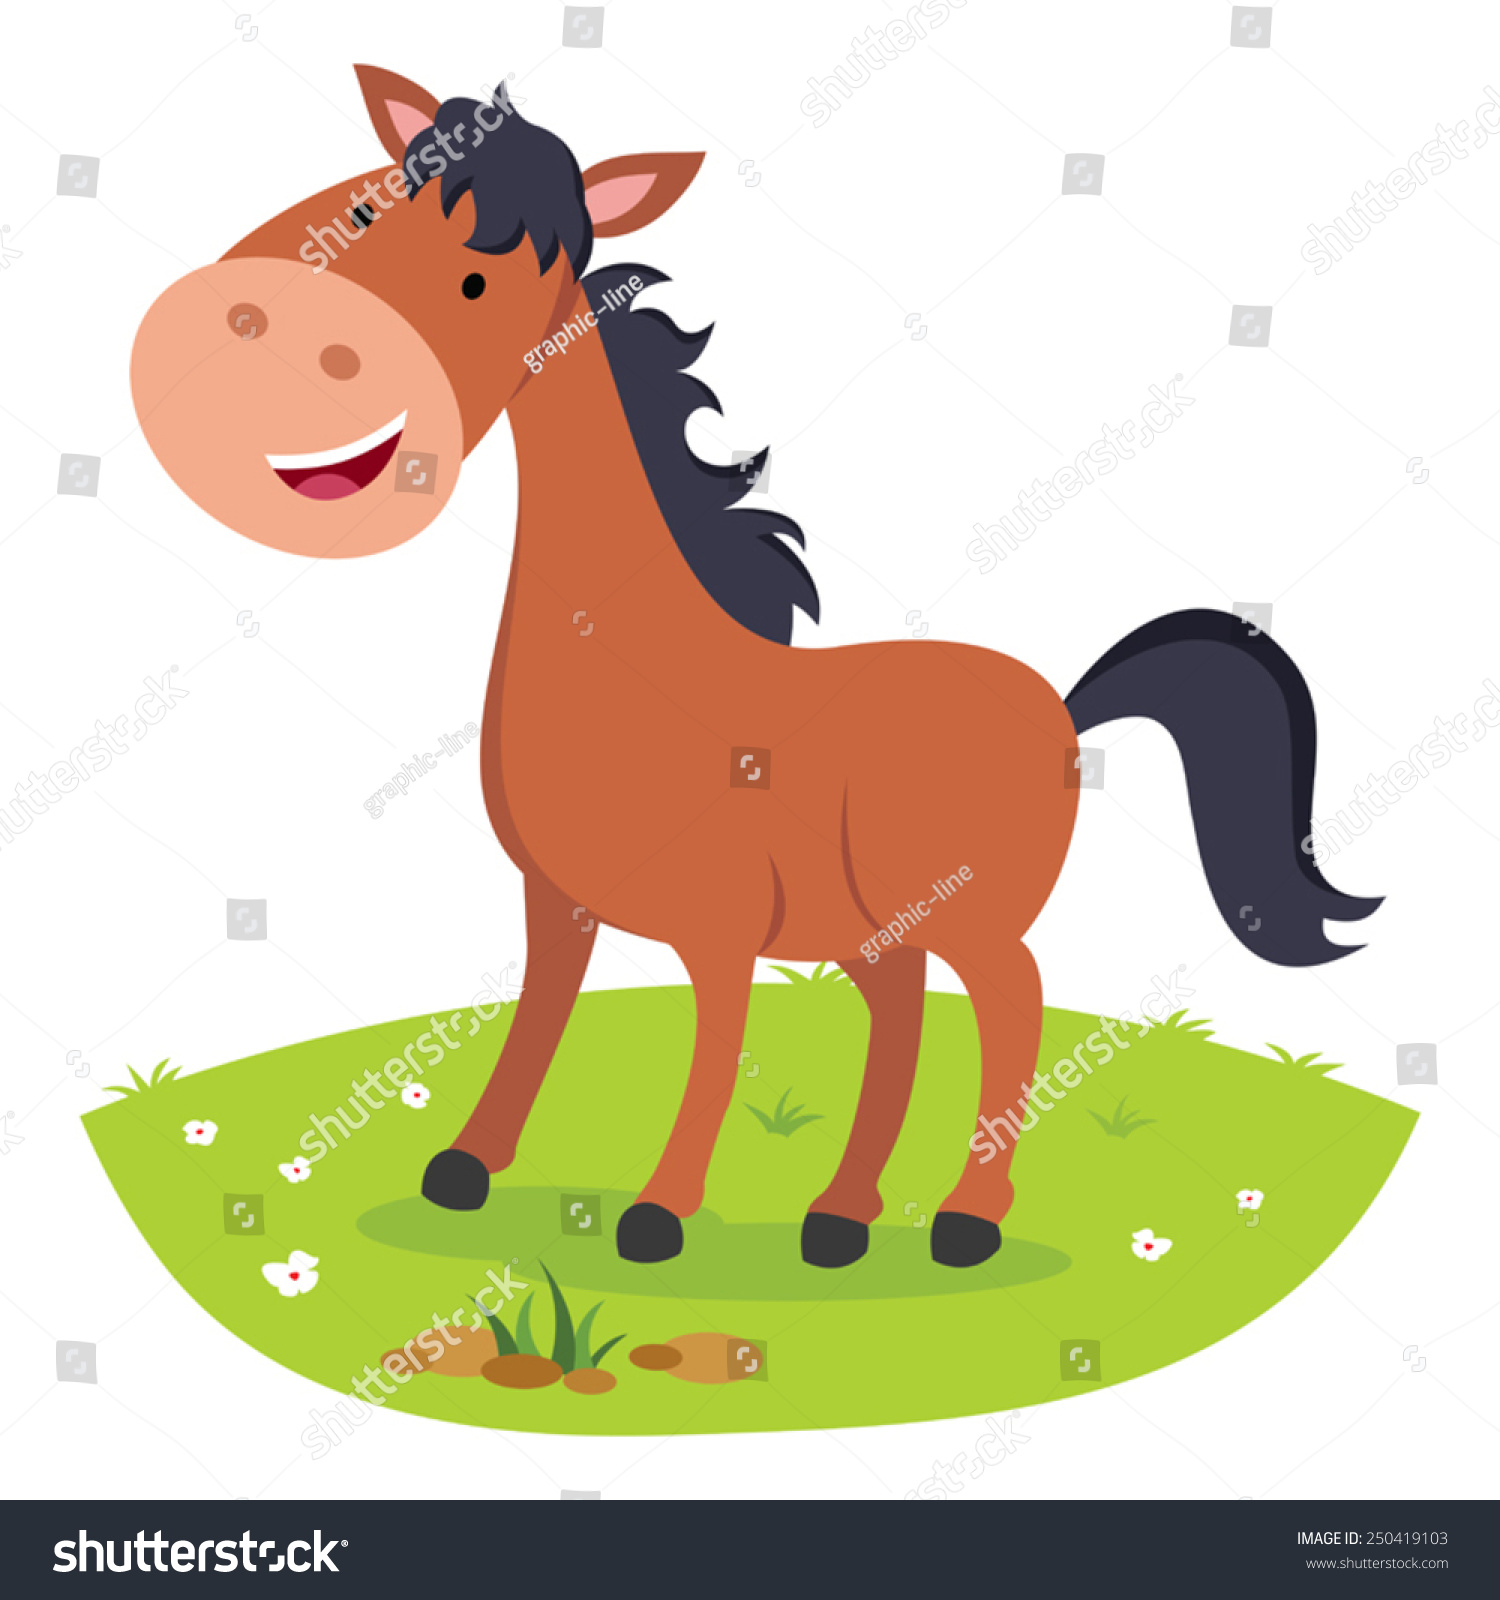 Horse Smiling. Cheerful Horse. Stock Vector Illustration 250419103 ...